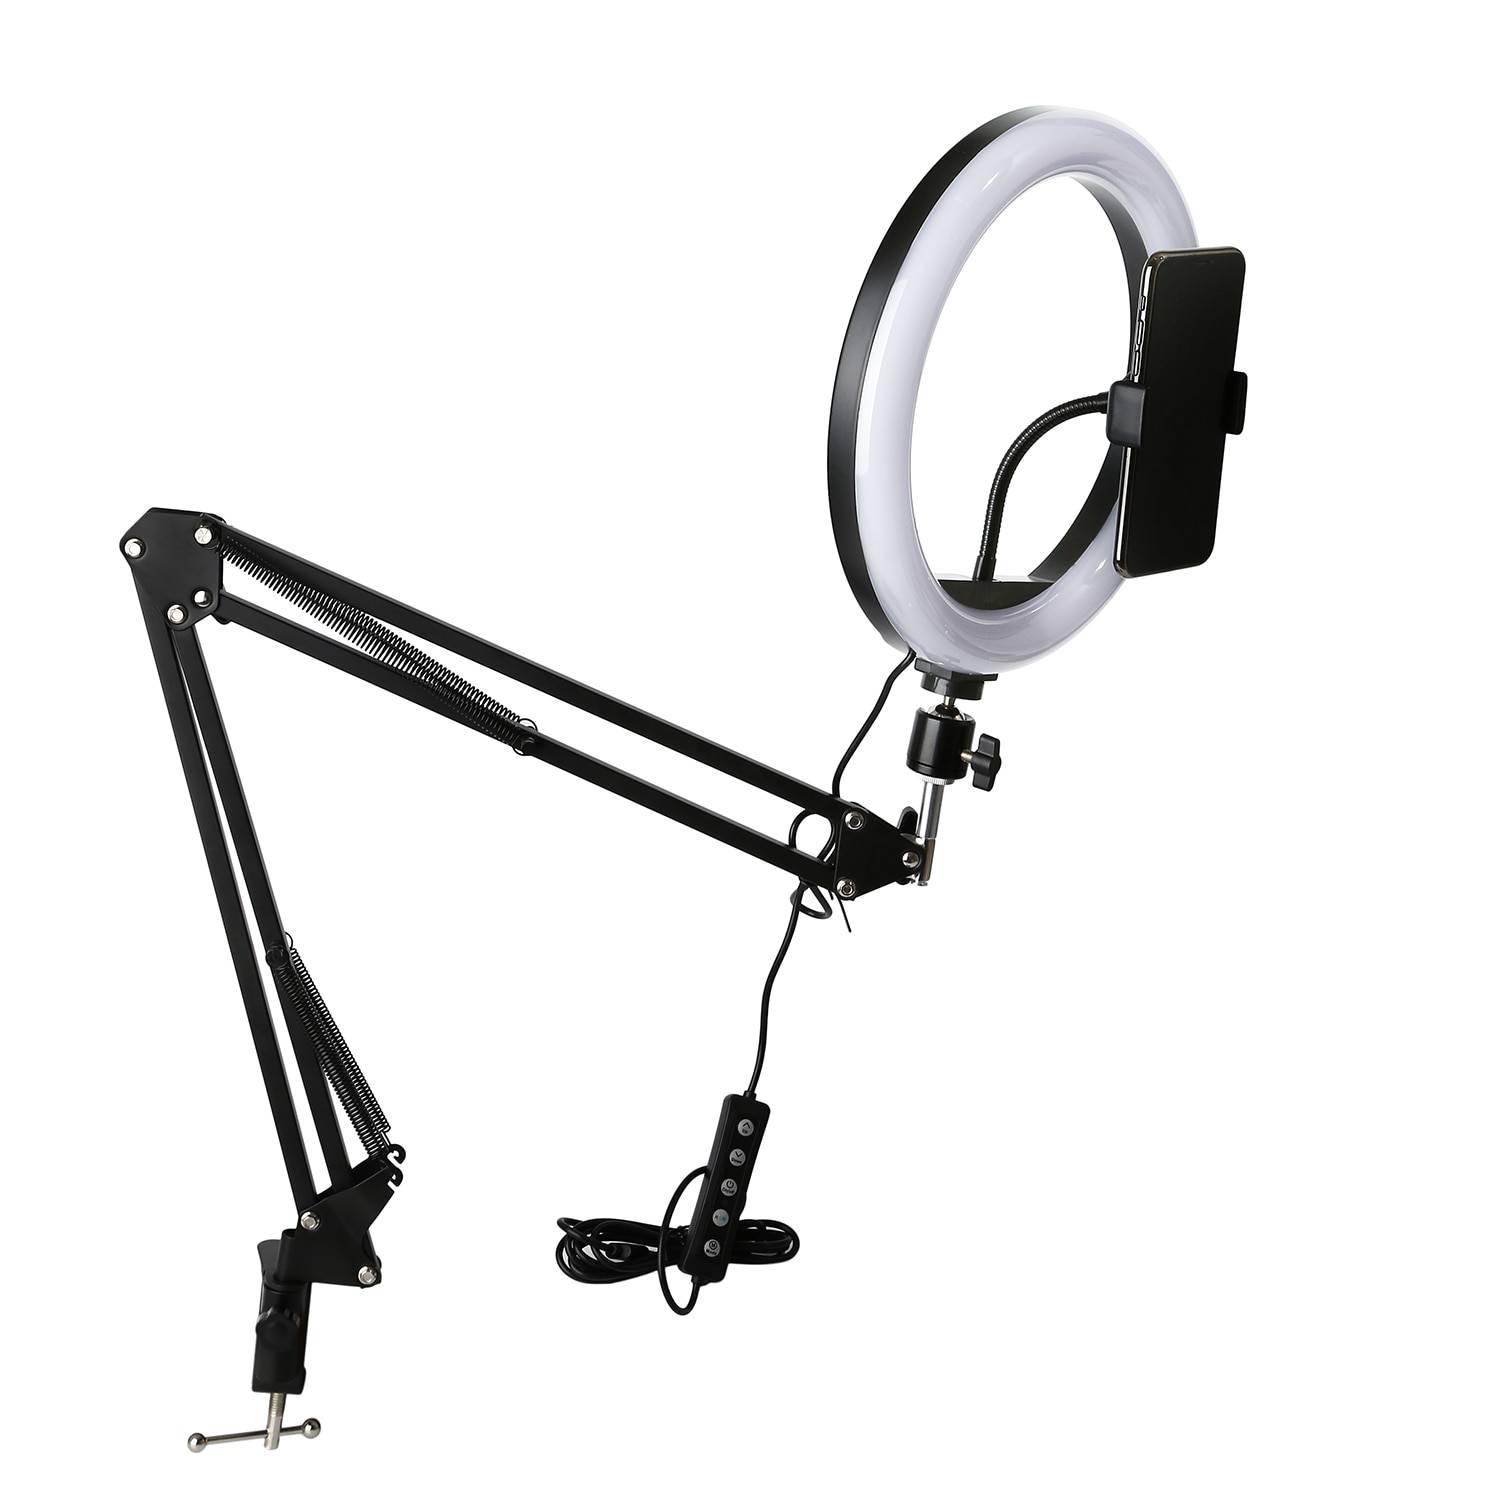 Photography Selfie Light 26cm 33cm Ring RGB Lamp With Long Arm Desktop Tablet For Phone Video Live Overhead shooting Manicure Desk & Table Lamps